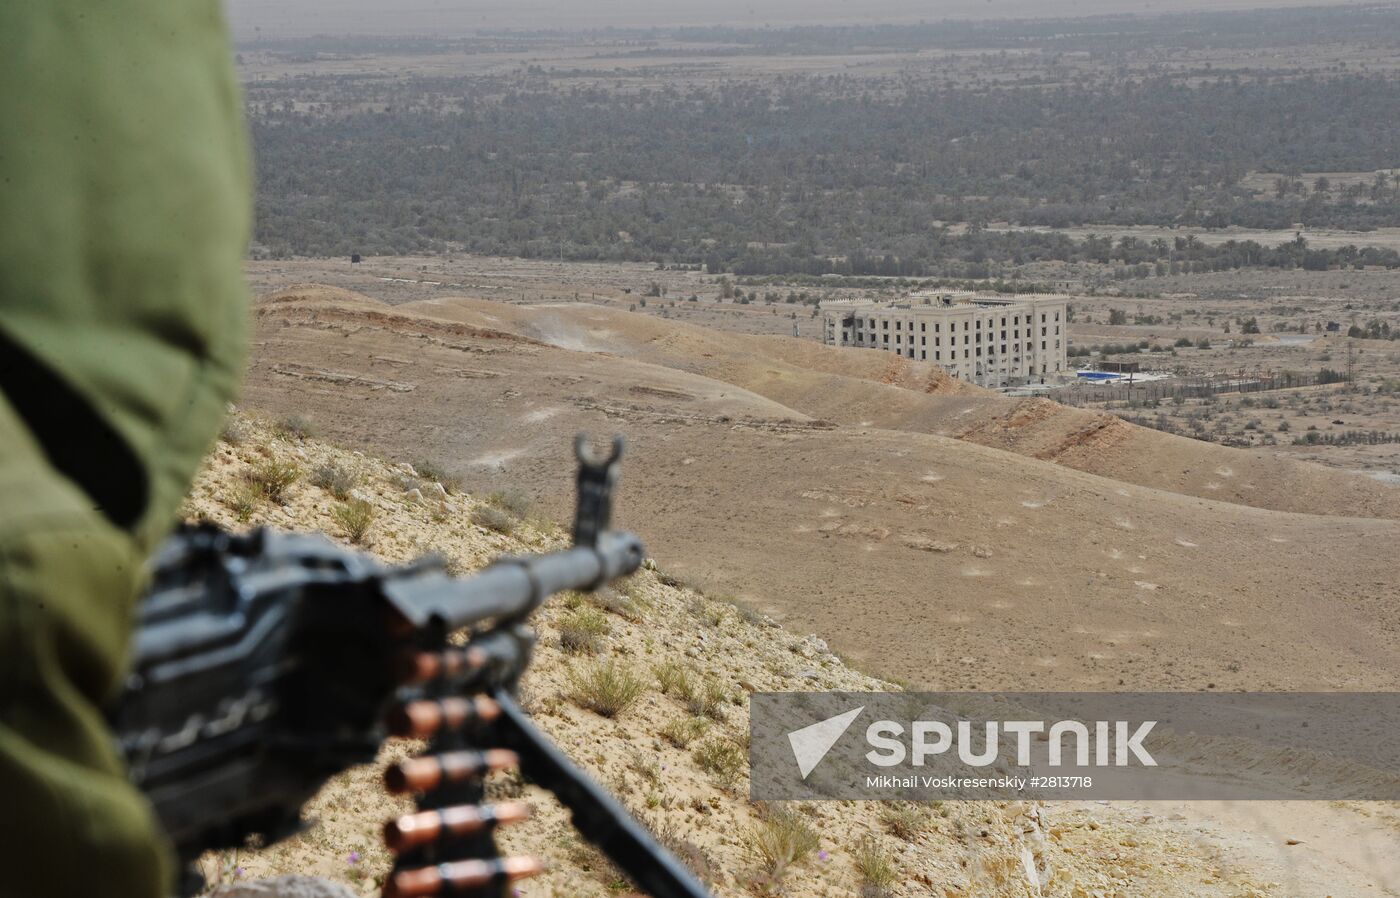 Syrian army and militias fight for Palmyra